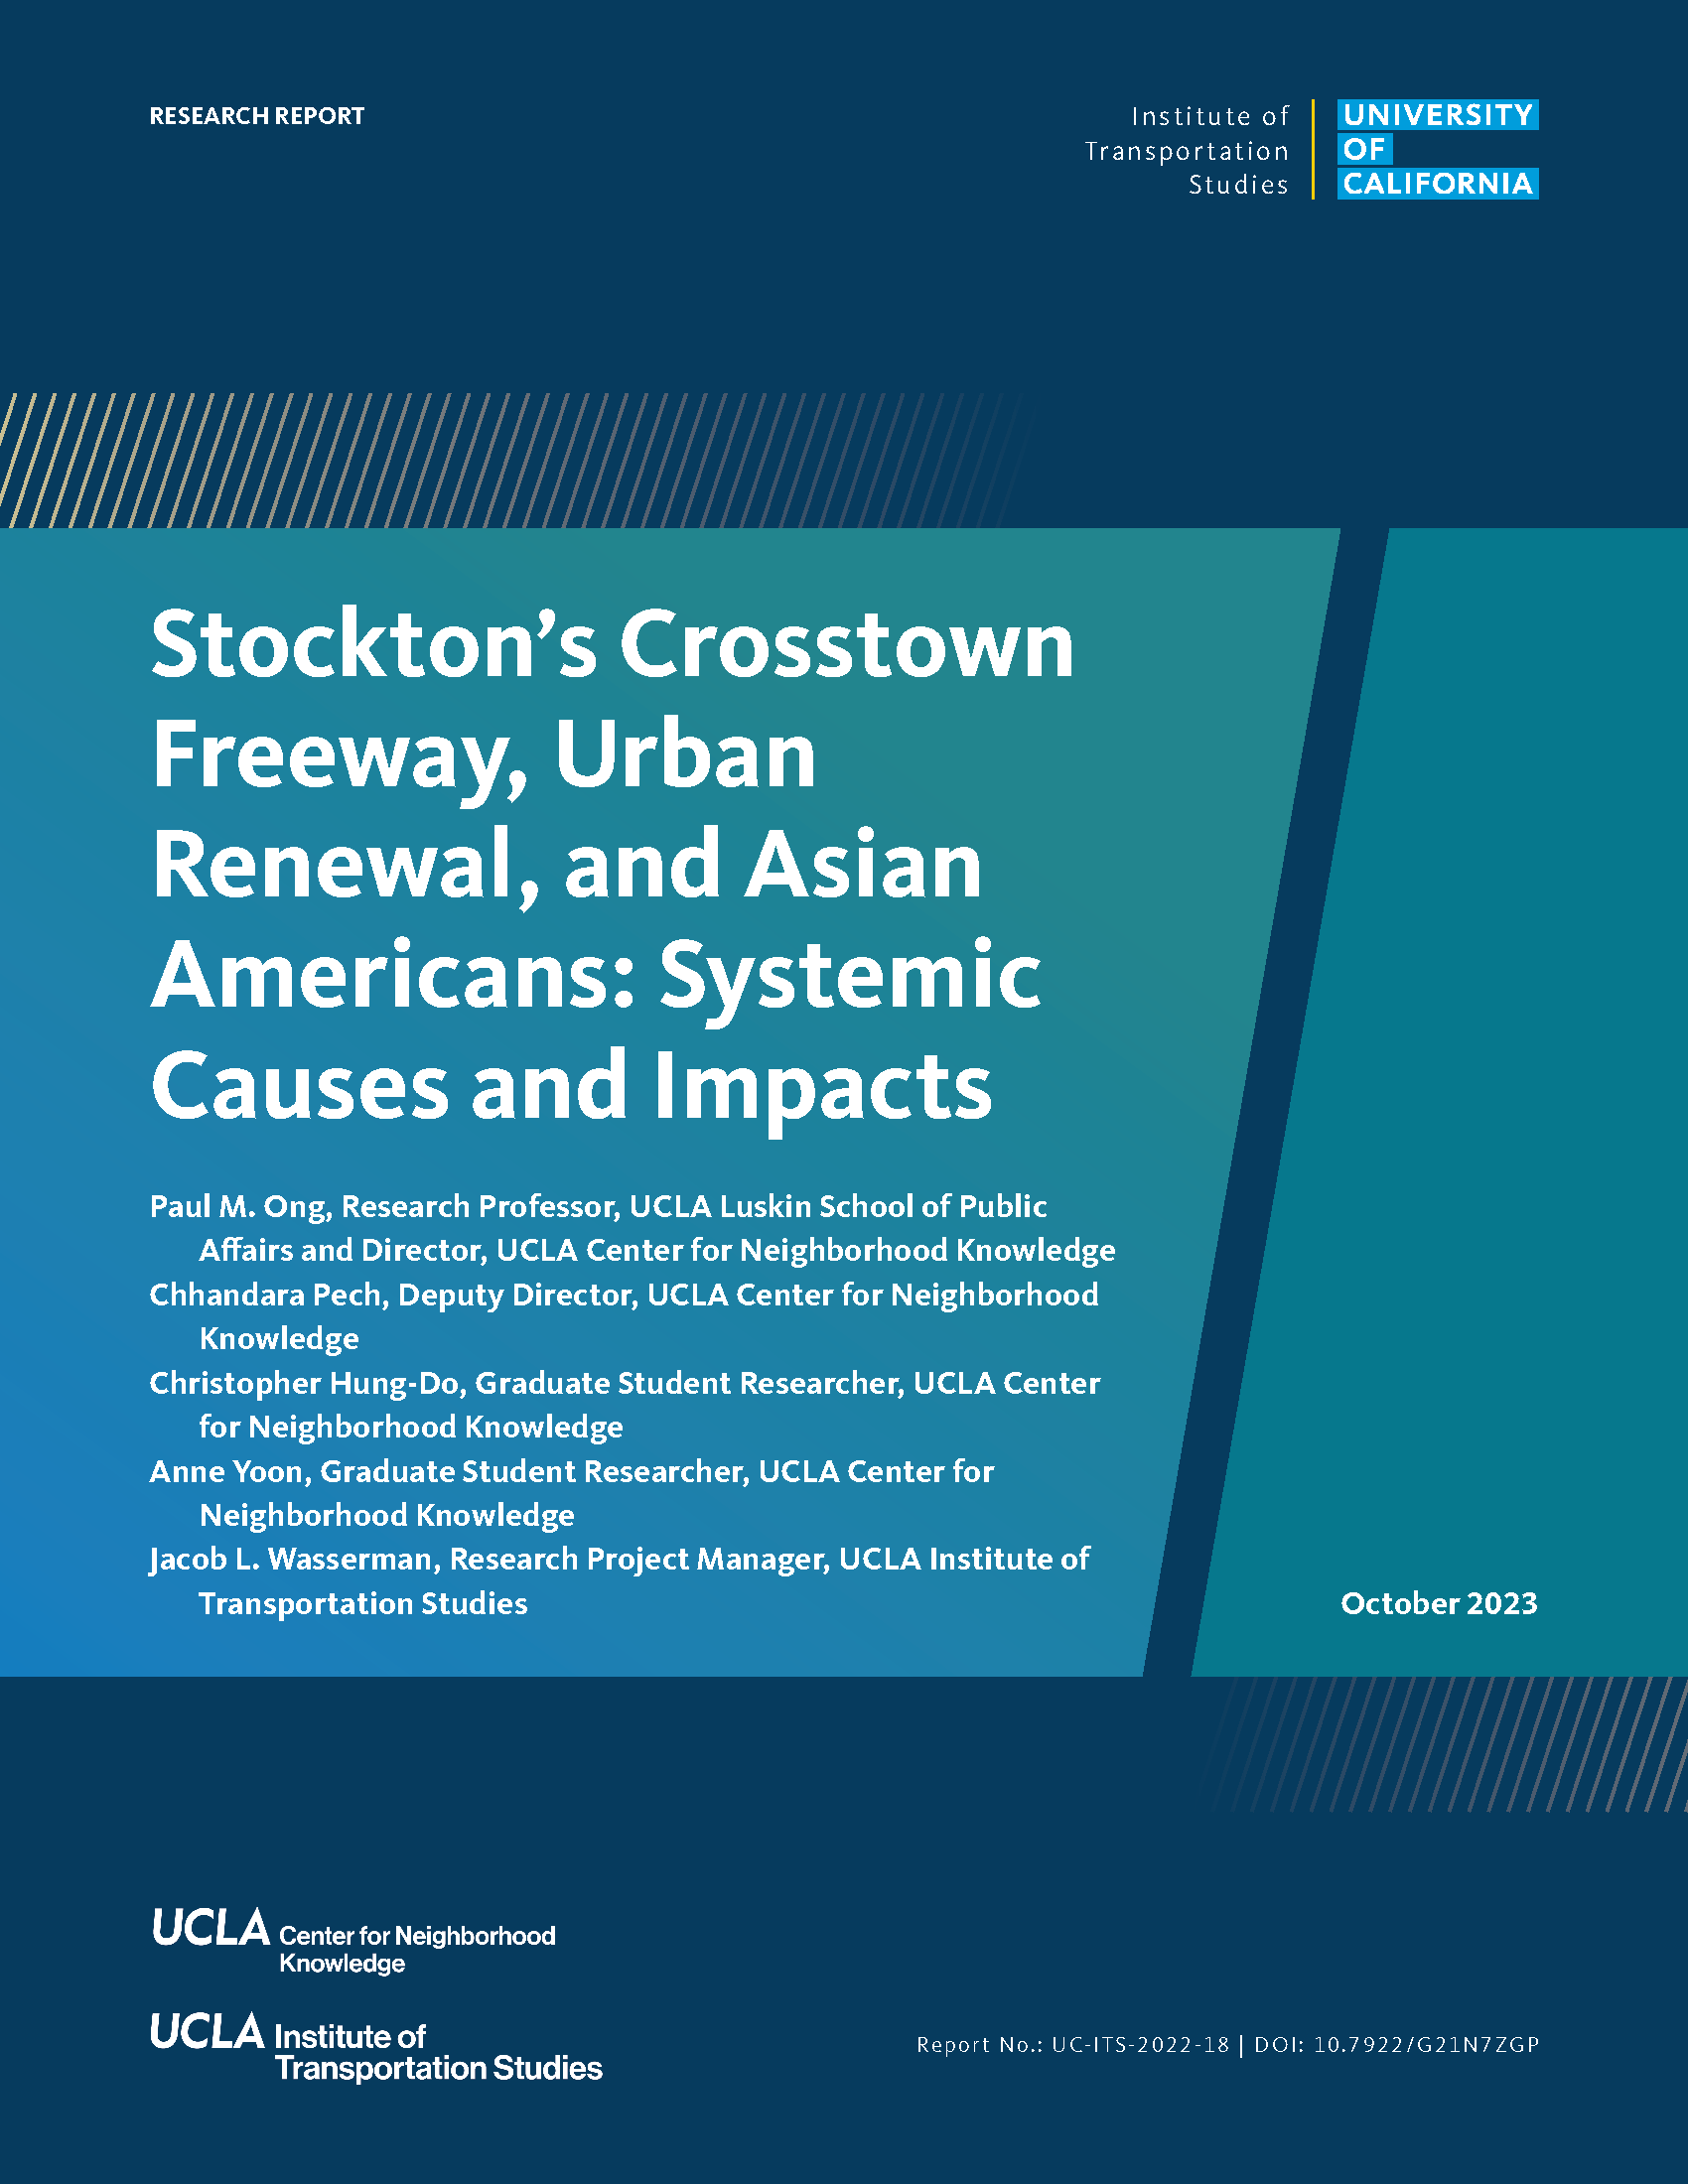 Stockton's Crosstown Freeway, Urban Renewal, and Asian Americans: Systemic Causes and Impacts